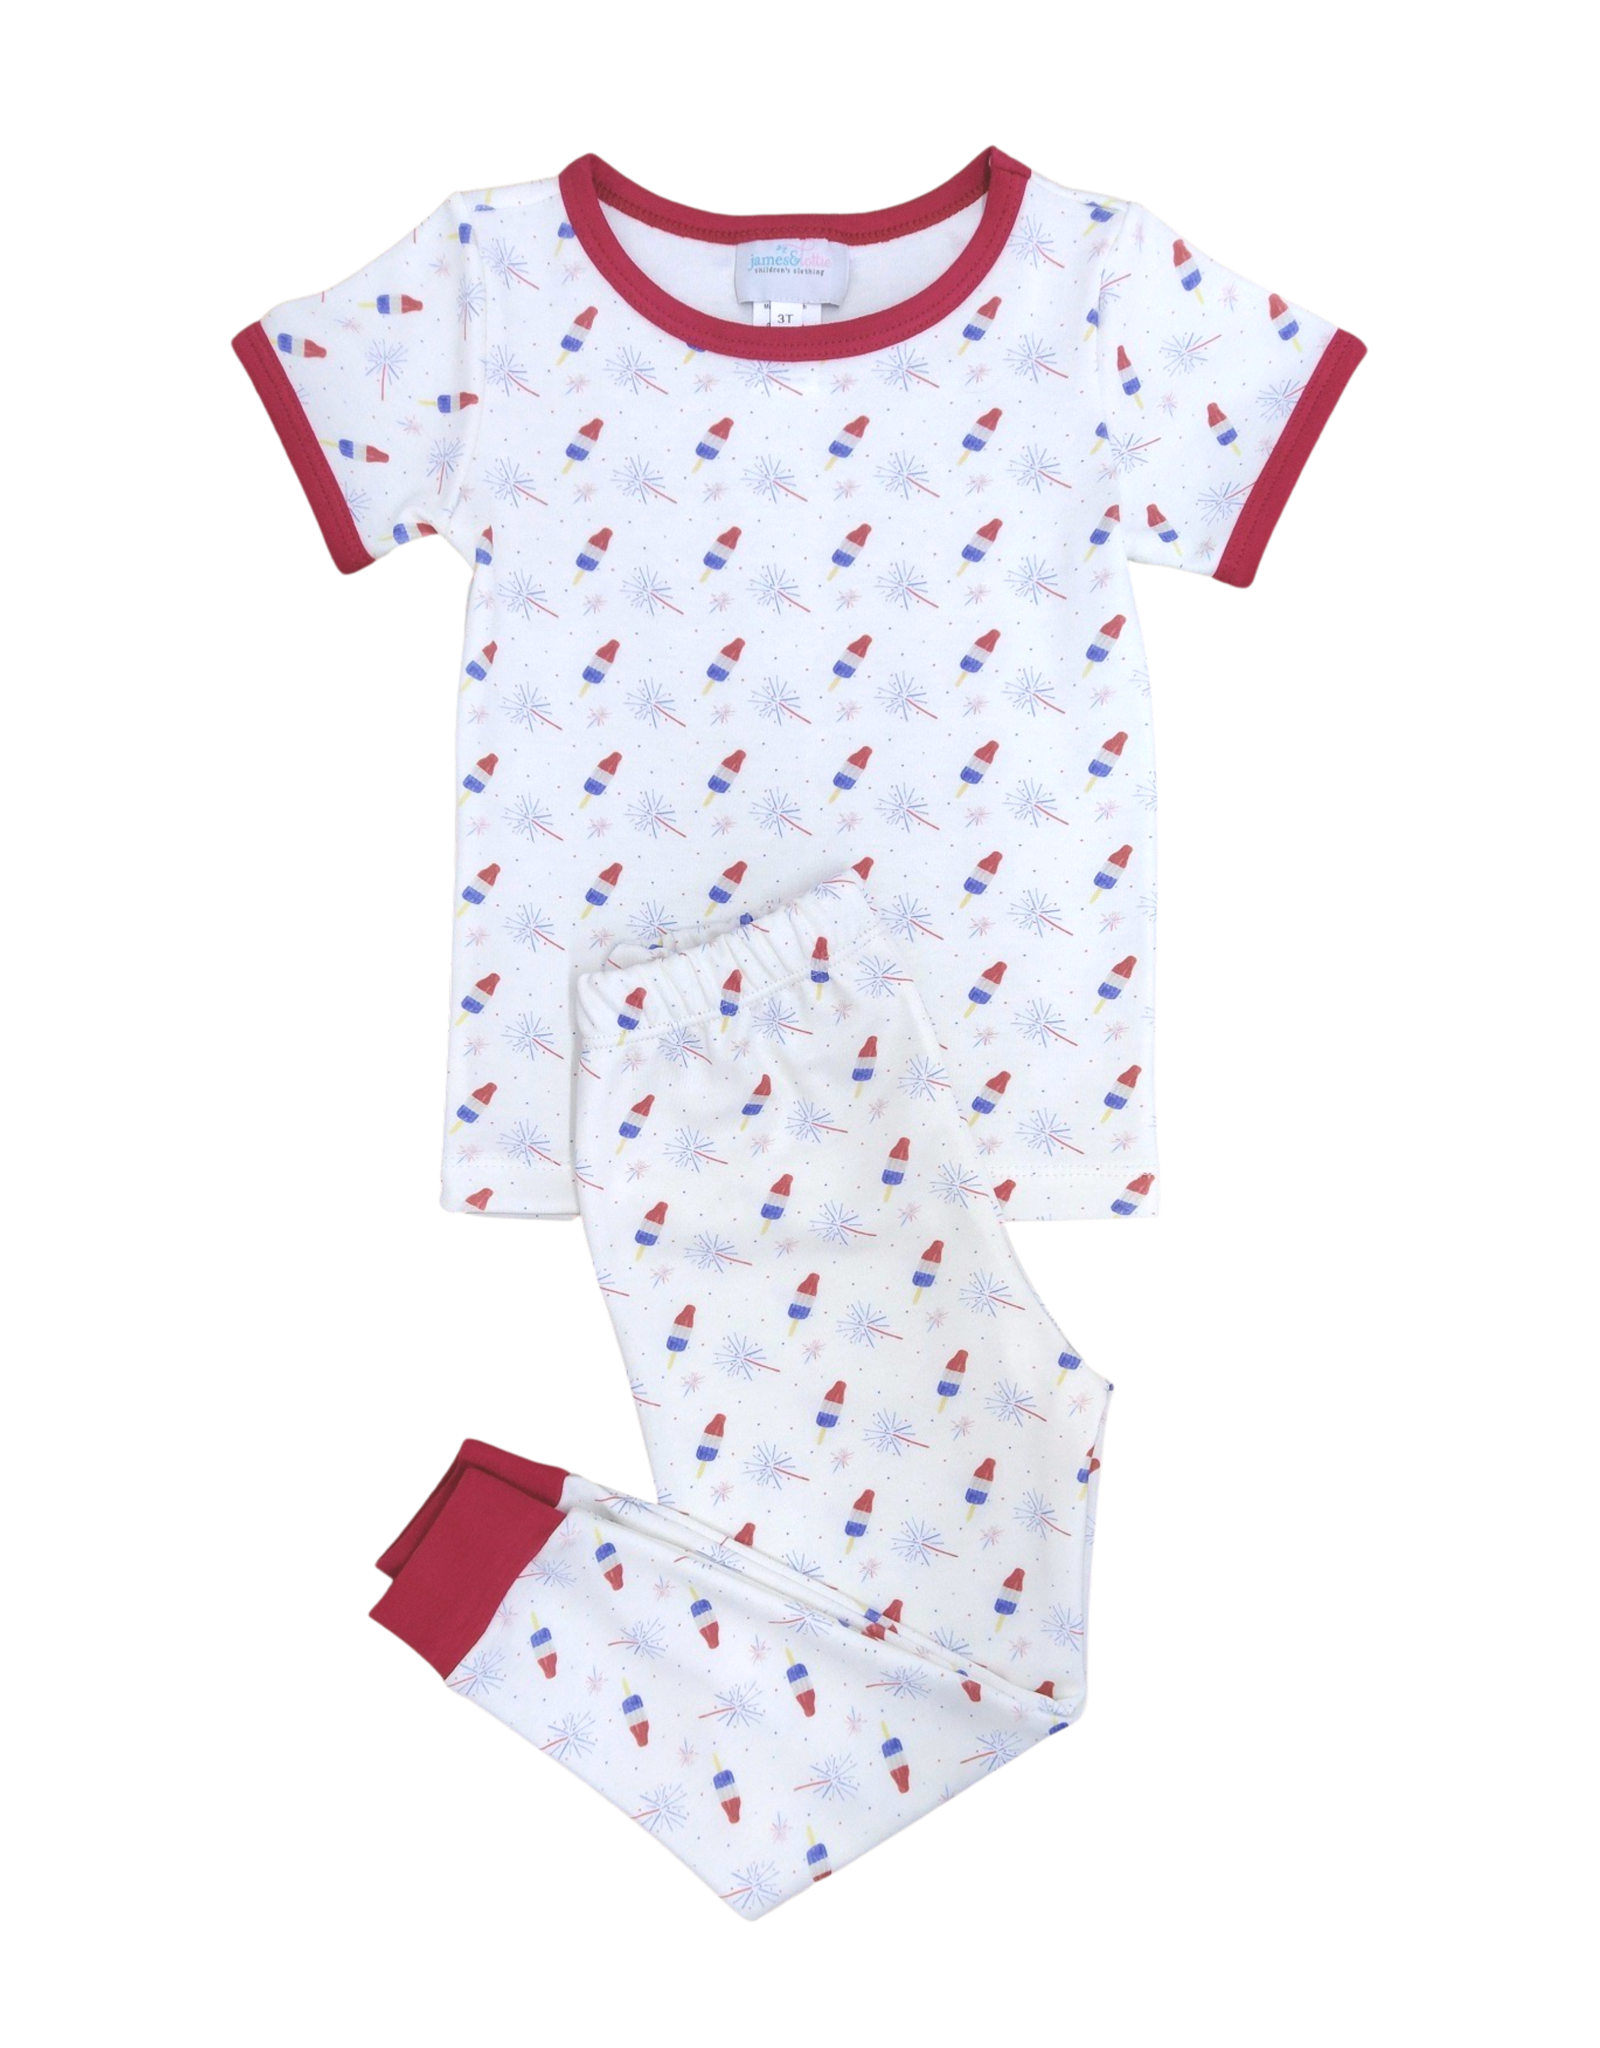 James and Lottie Two Piece Jammie Set